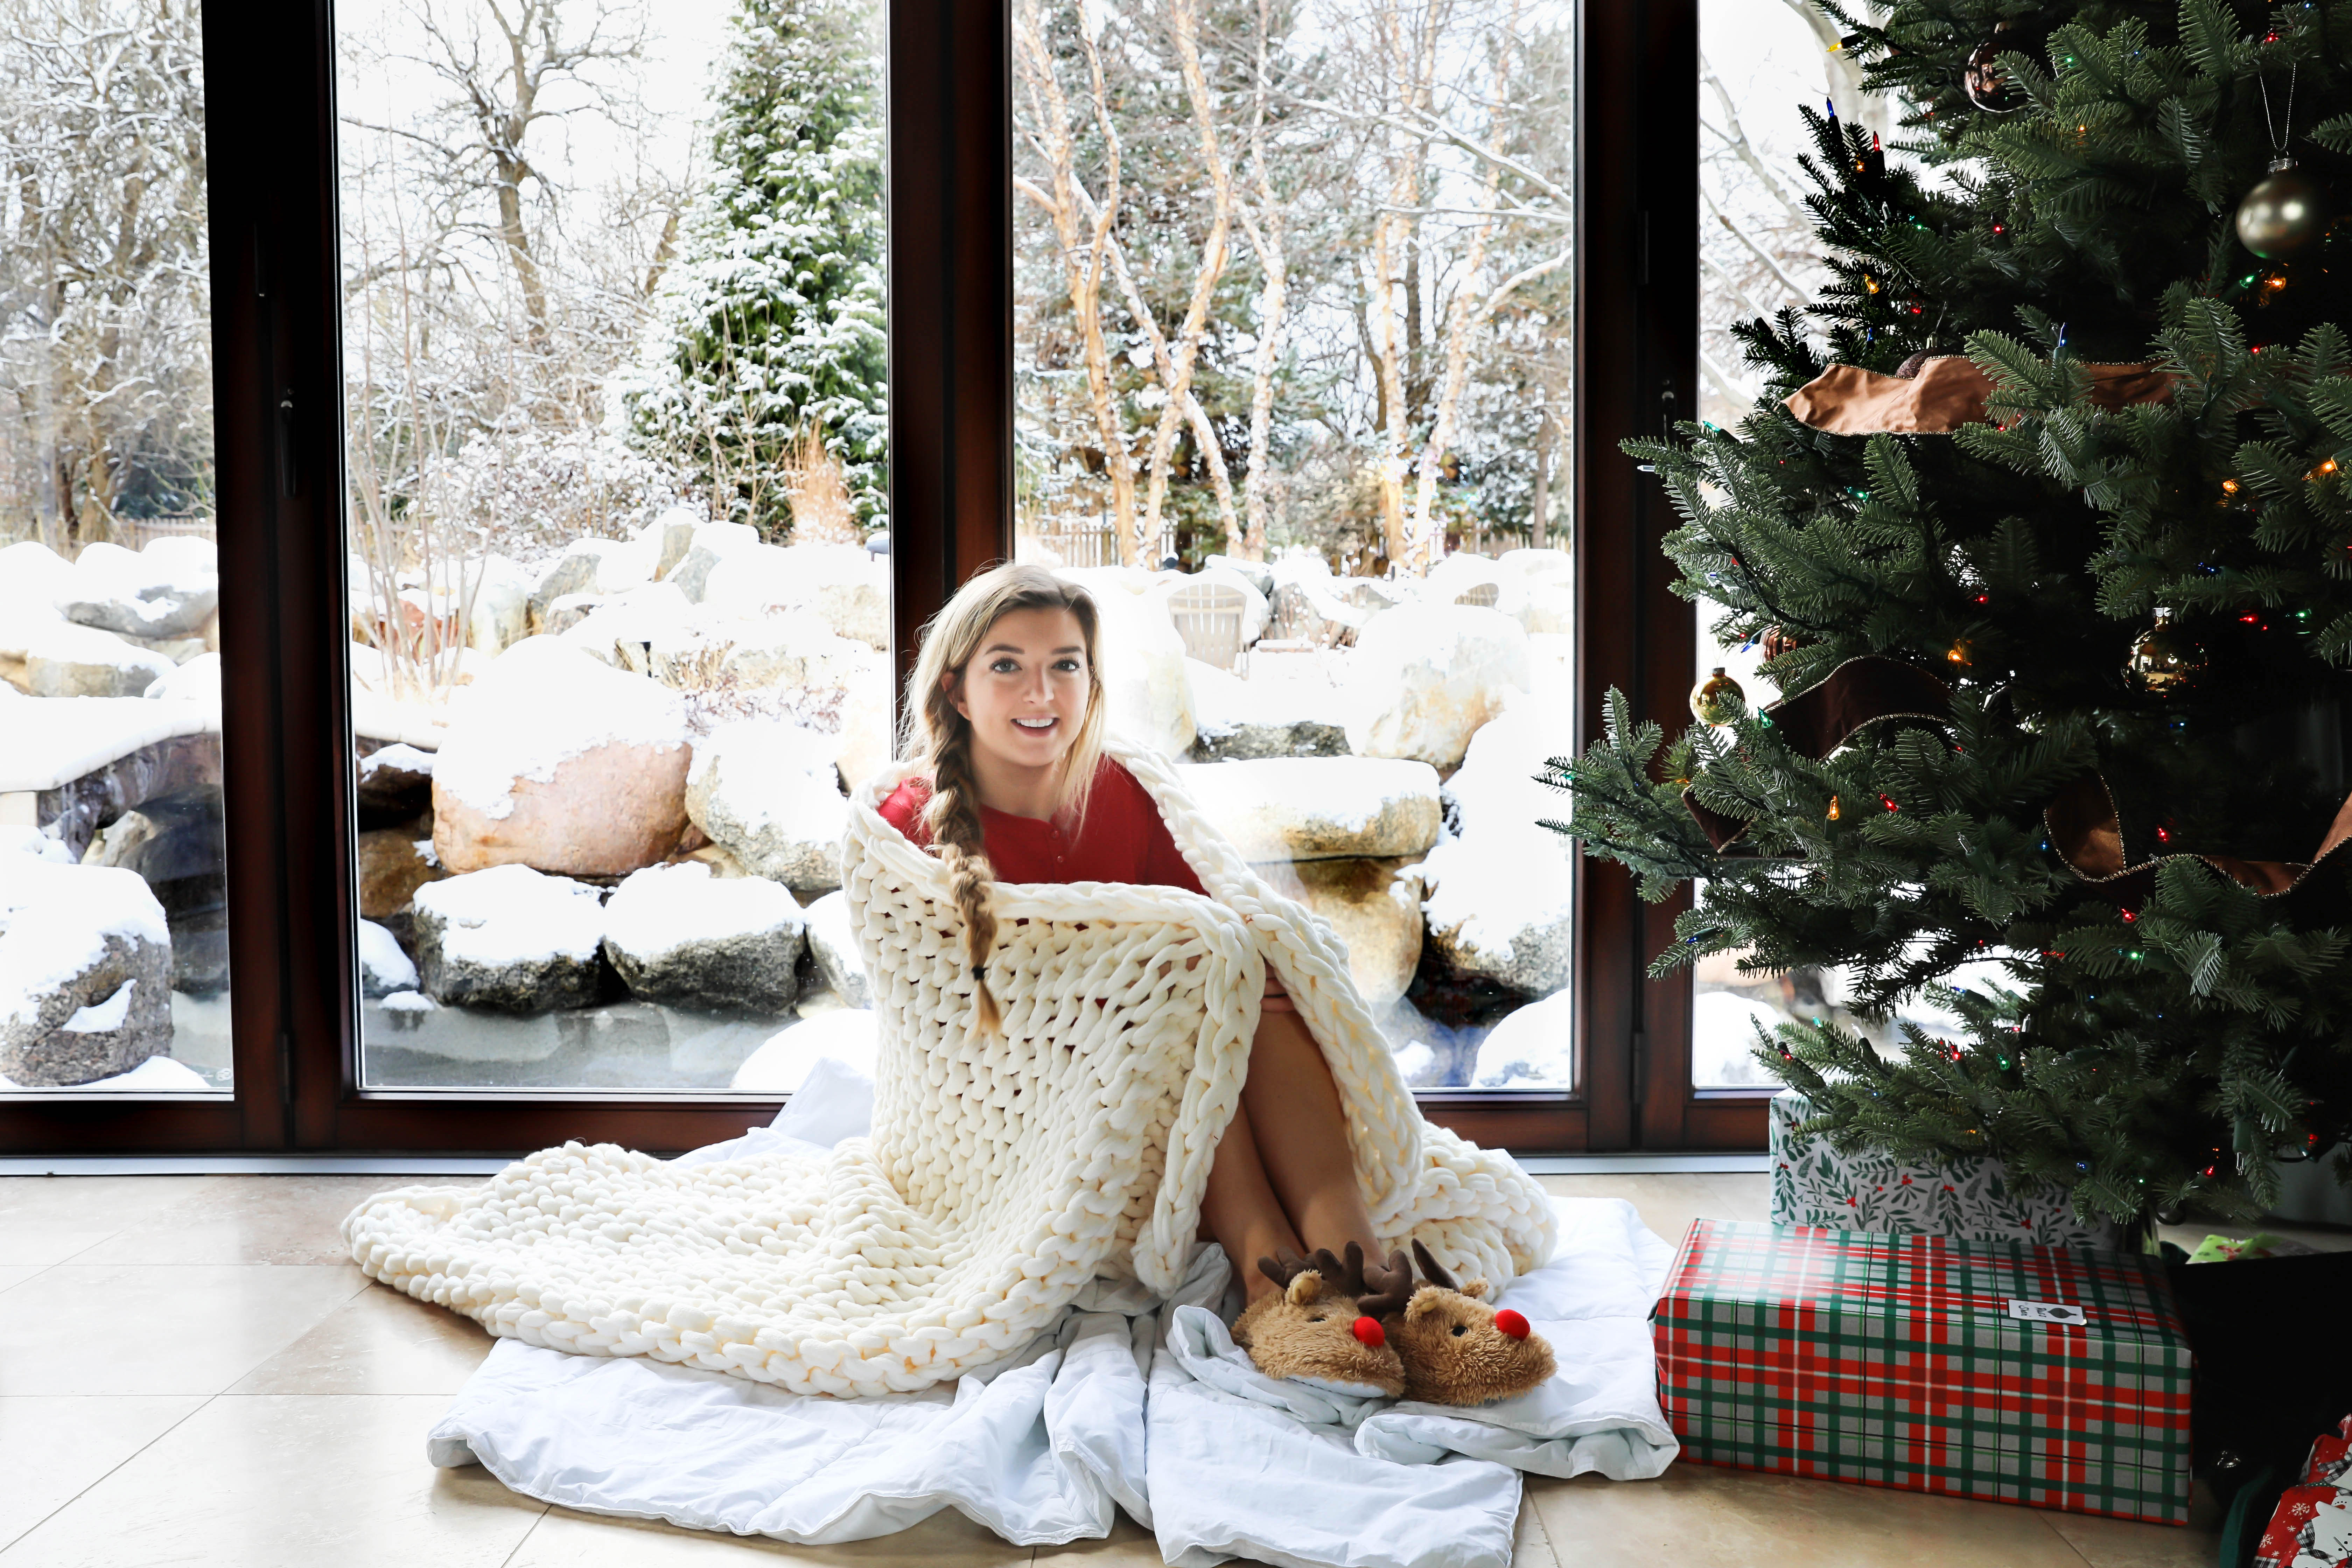 Snowy Christmas Windows and knit blanket by the christmas tree on fashion blog daily dose of charm by lauren lindmark